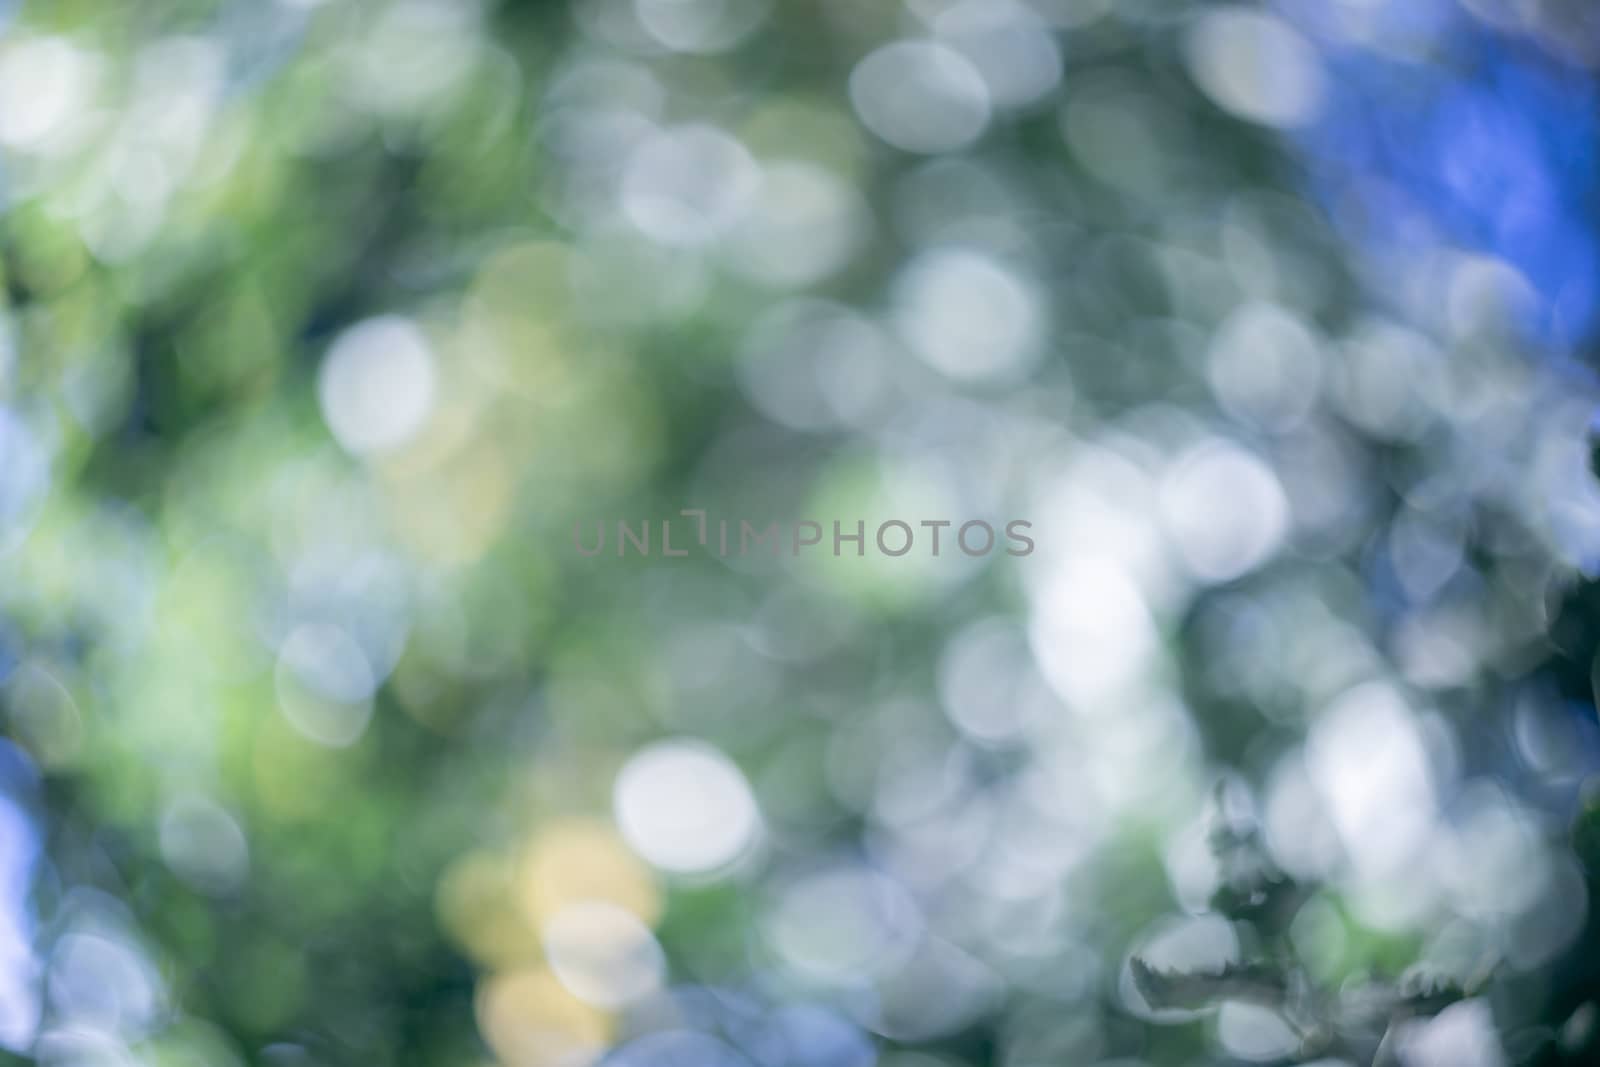 Abstract blurred green nature background. blurry backdrop for design element template